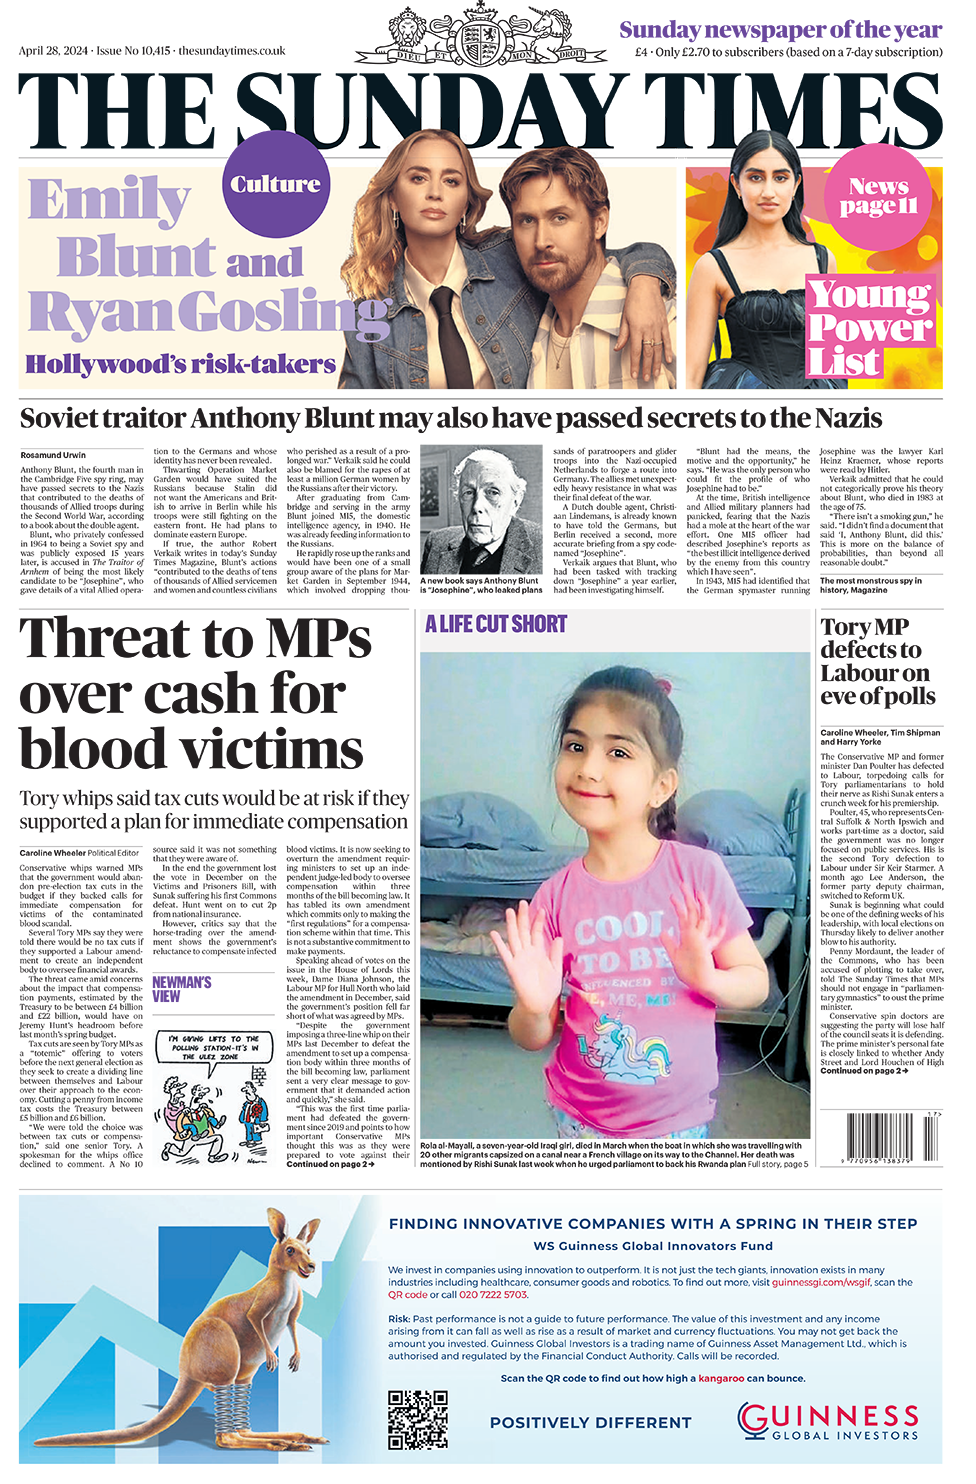 The headline in the Times reads: "Threat to MPs over cash for blood victims".